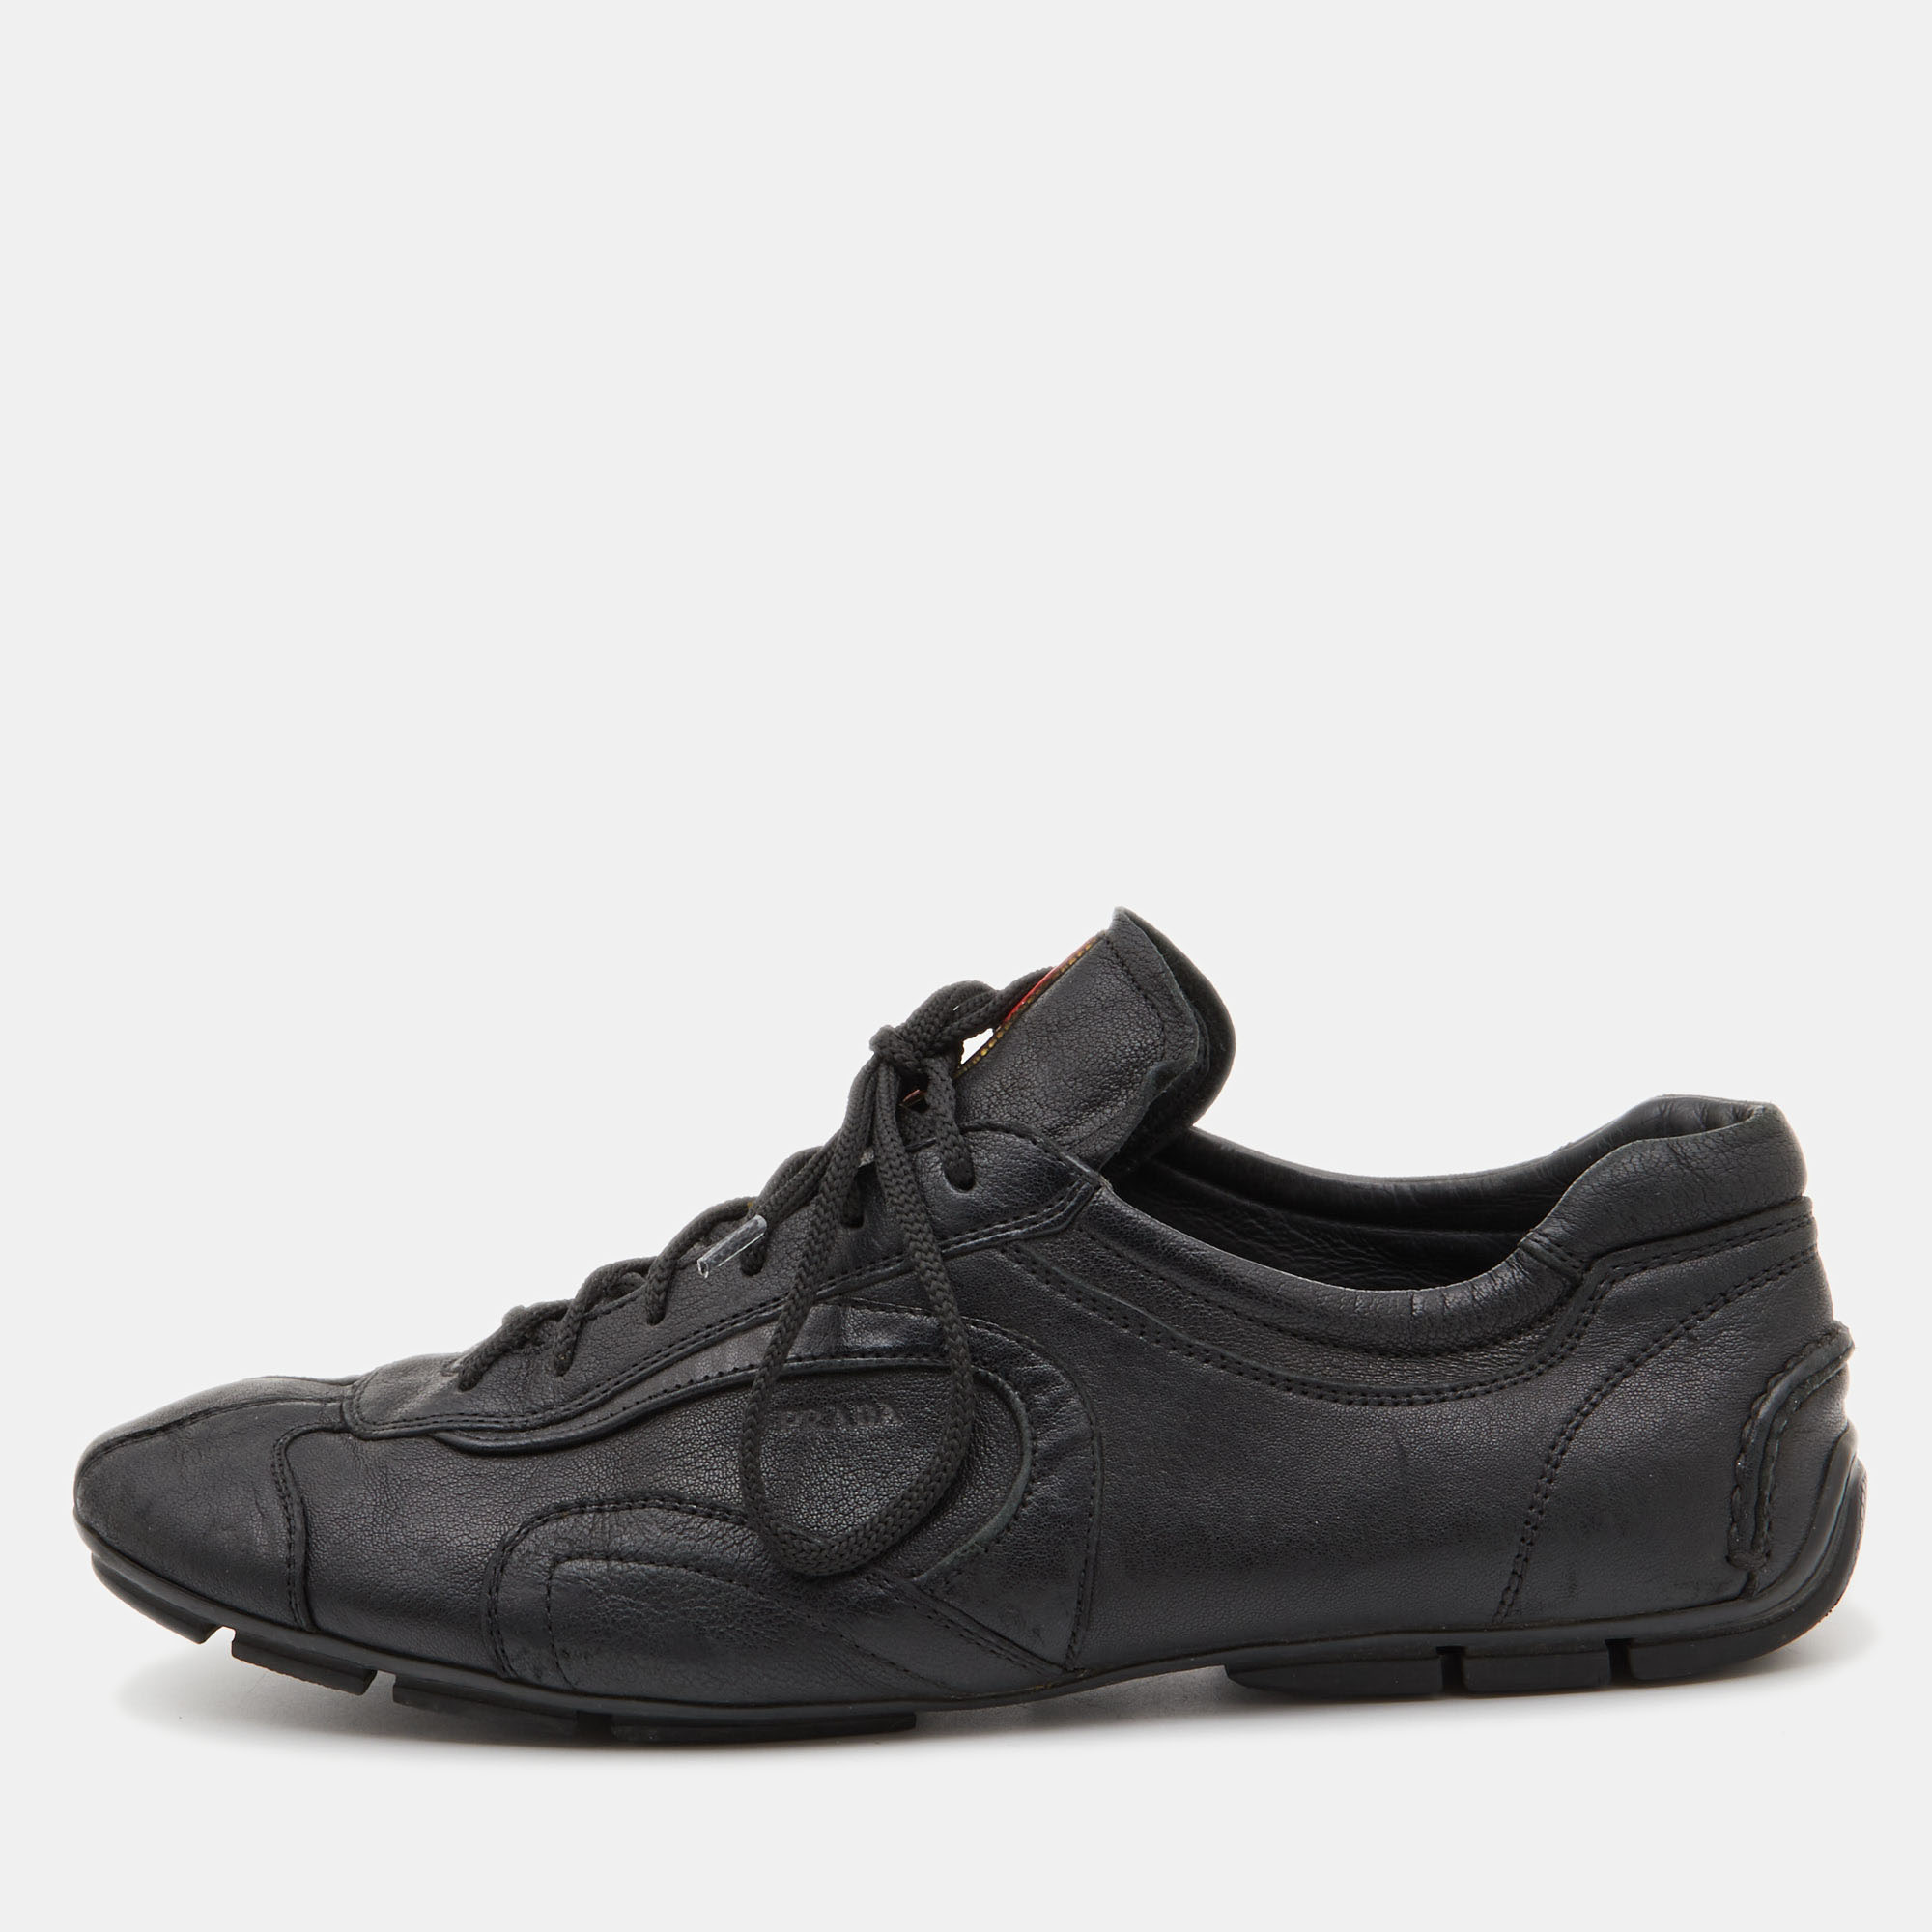 Prada Sports Black Leather Low Top Sneakers Size 43